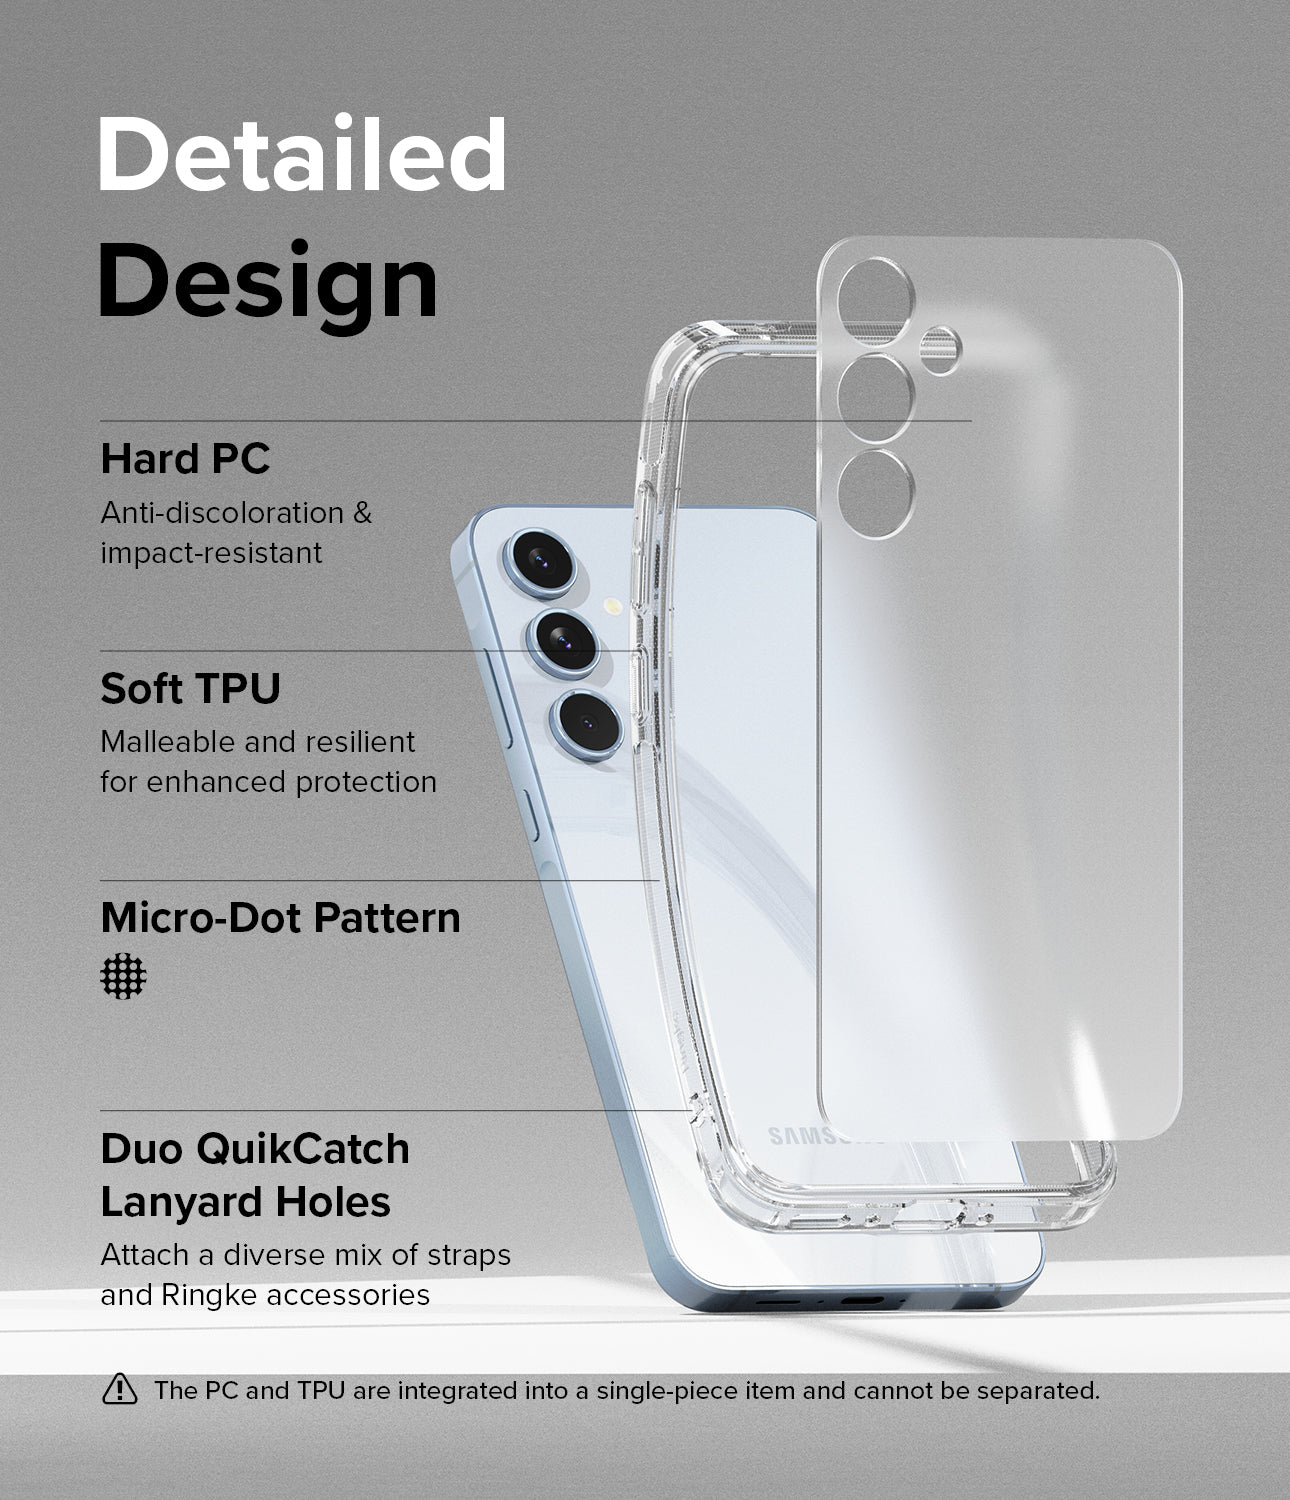 Galaxy A35 Case | Fusion Matte - Detailed Design. Anti-discoloration and impact-resistant with Hard PC. Malleable and resilient for enhanced protection with Soft TPU. Micro-Dot Pattern. Duo QuikCatch Lanyard Holes with attach a diverse mix of straps and Ringke accessories.